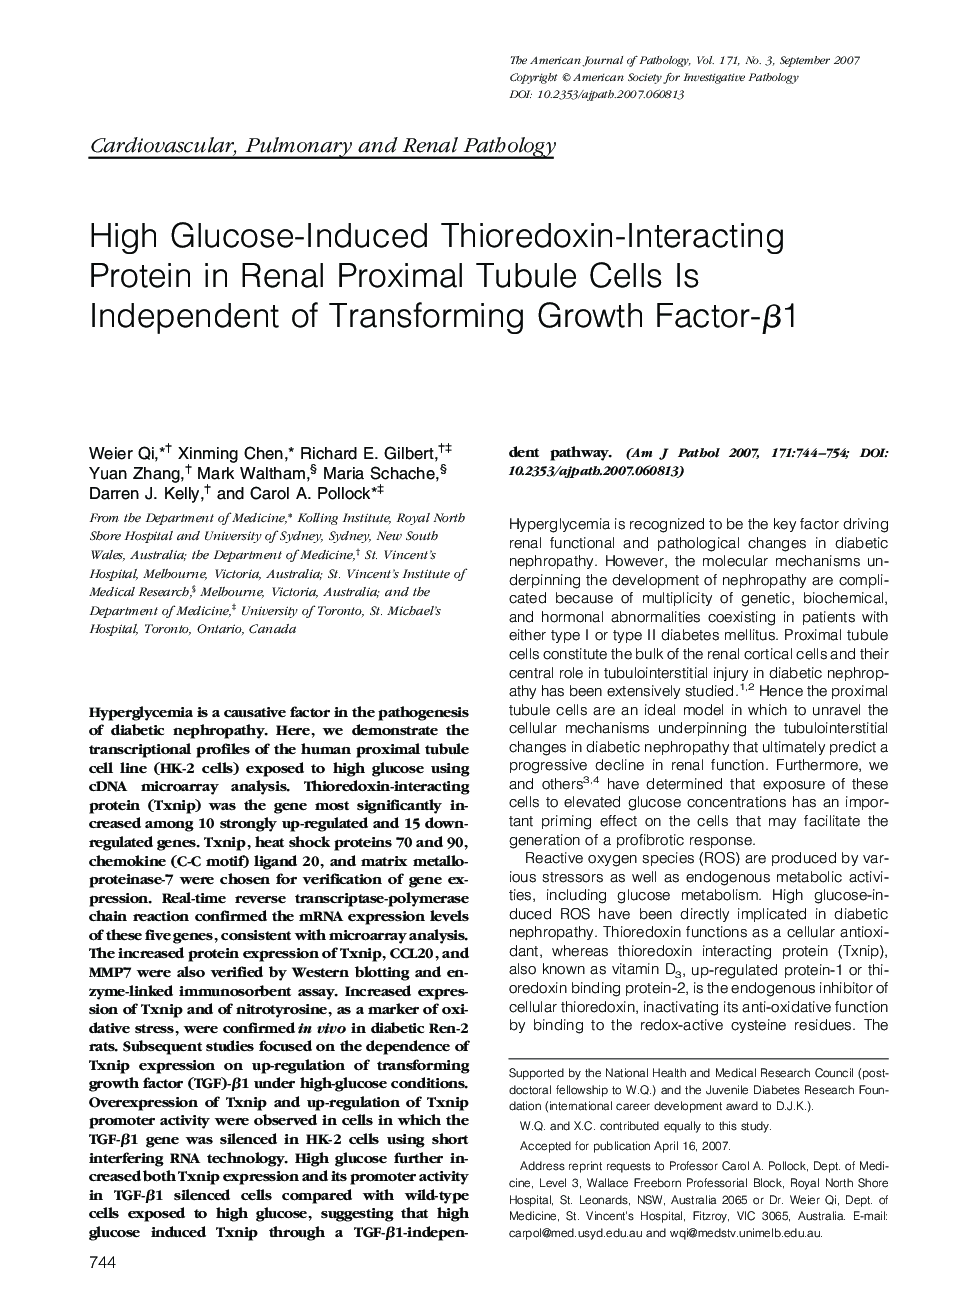 Regular ArticlesHigh Glucose-Induced Thioredoxin-Interacting Protein in Renal Proximal Tubule Cells Is Independent of Transforming Growth Factor-Î²1